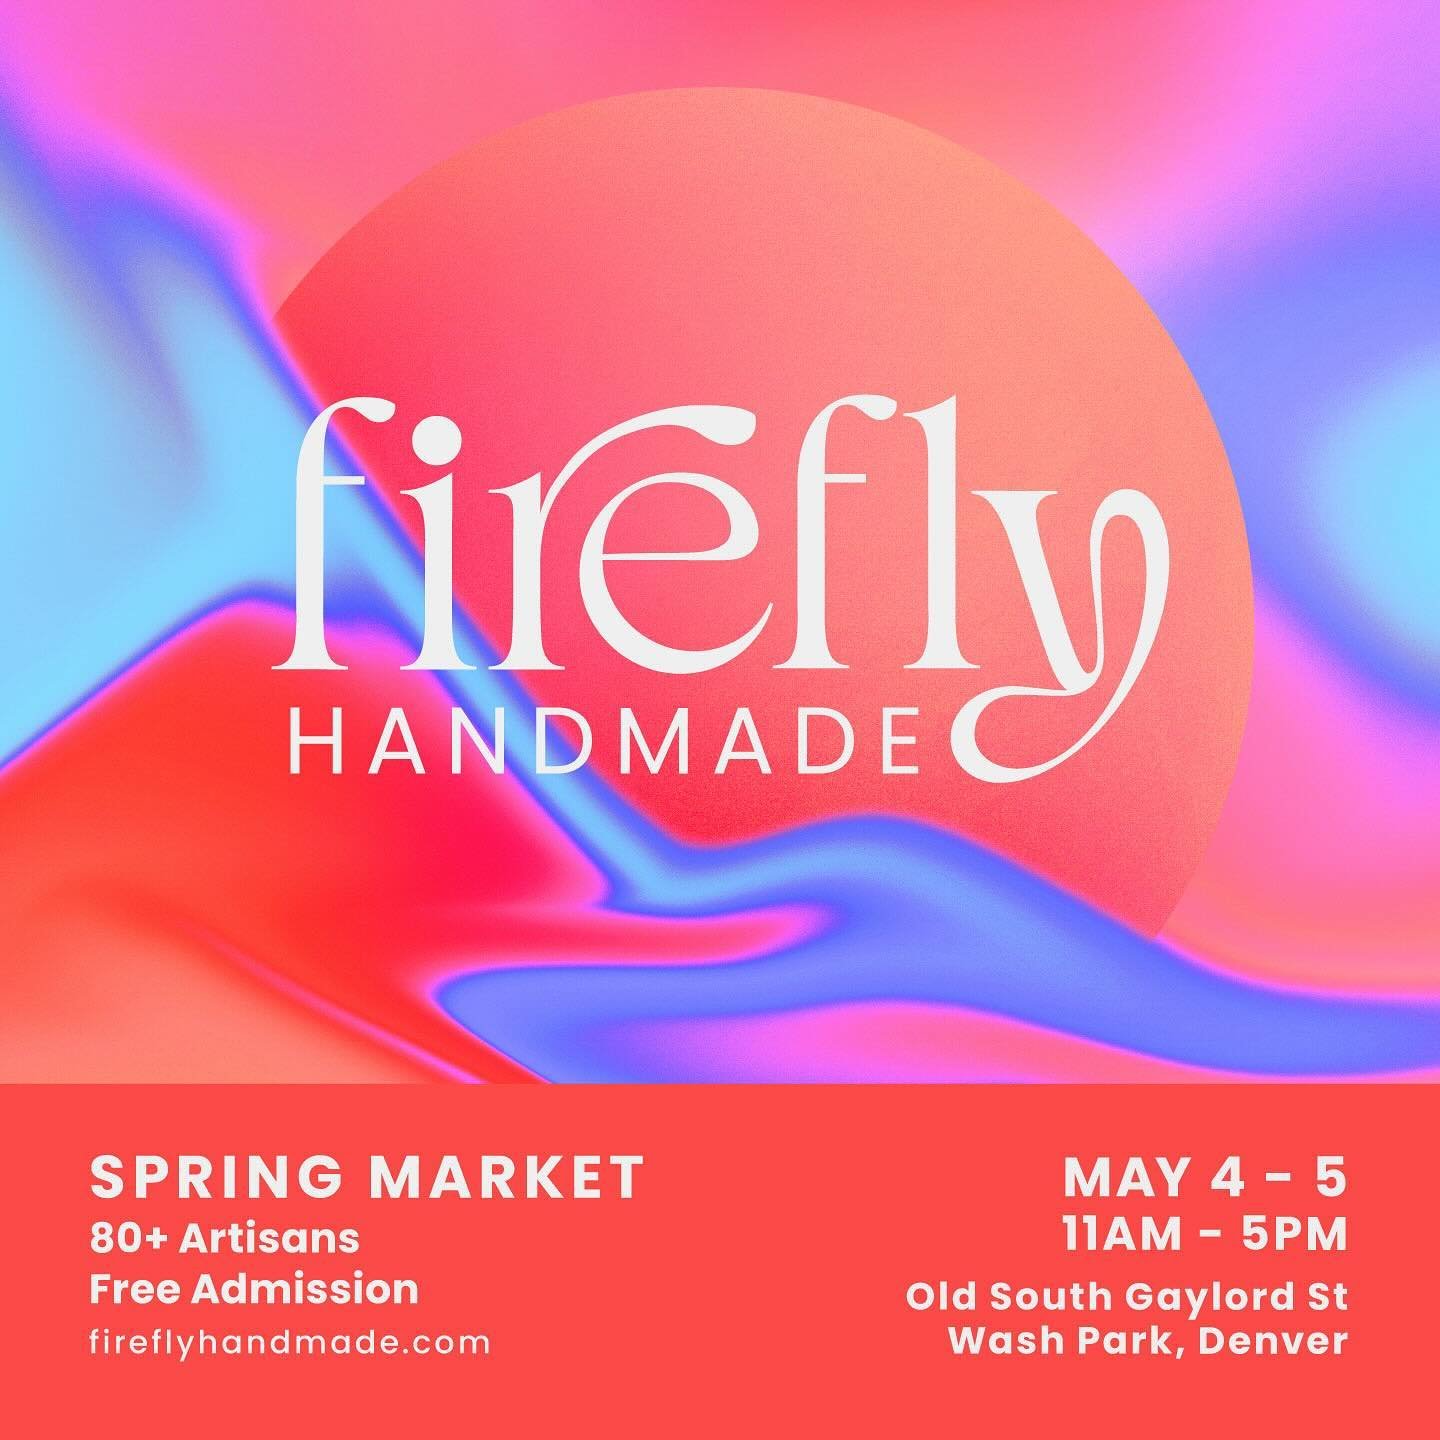 This weekend in Denver, the first Firefly Market! I found out I&rsquo;m booth number 12, so if you&rsquo;re around come say hi. It looks like a beautiful weekend (fingers crossed). #artfairseason #denverartfair #denverartscene #coloradoartist #abstra